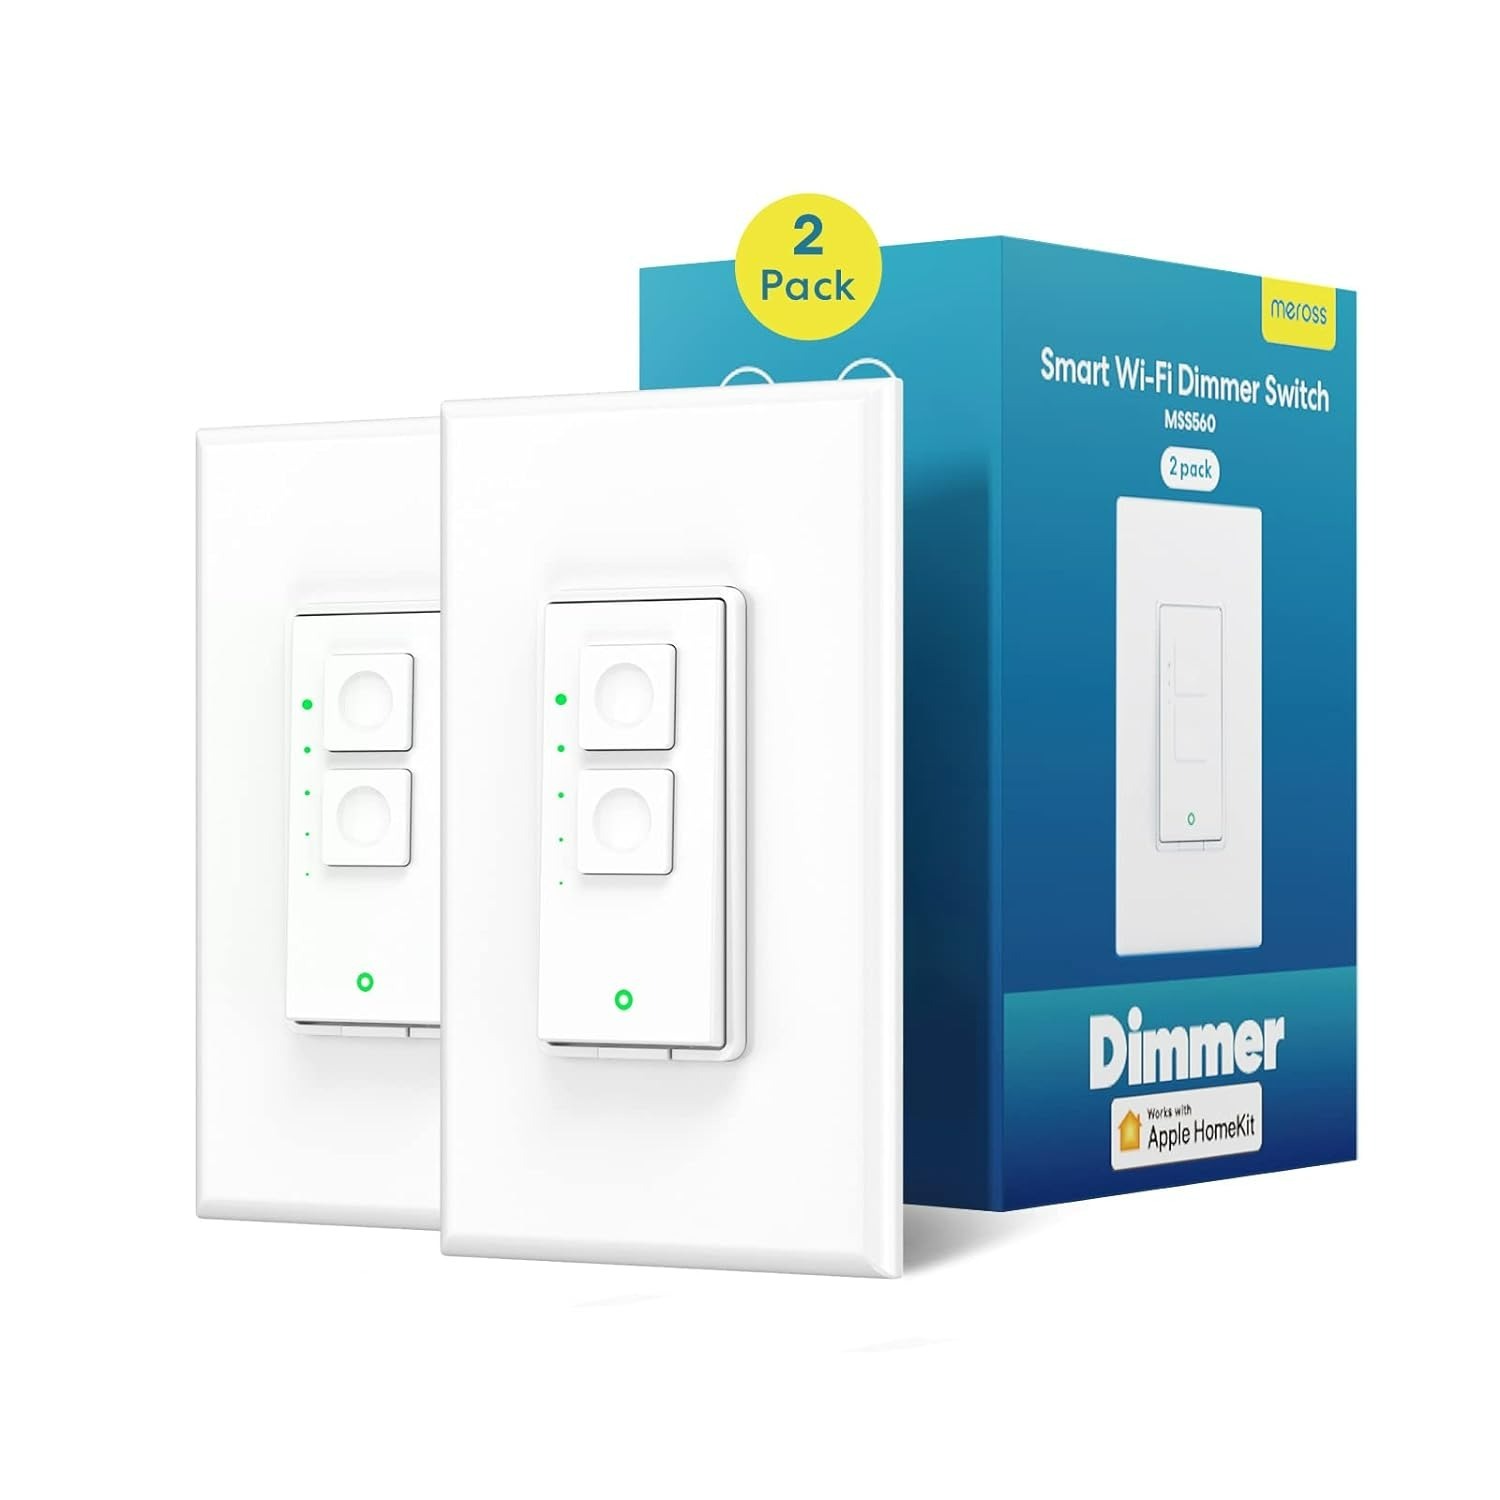 Meross WiFi Smart Dimmer Switch 2 Pack $34.13 & More + Free Shipping w/ Prime or orders $35+